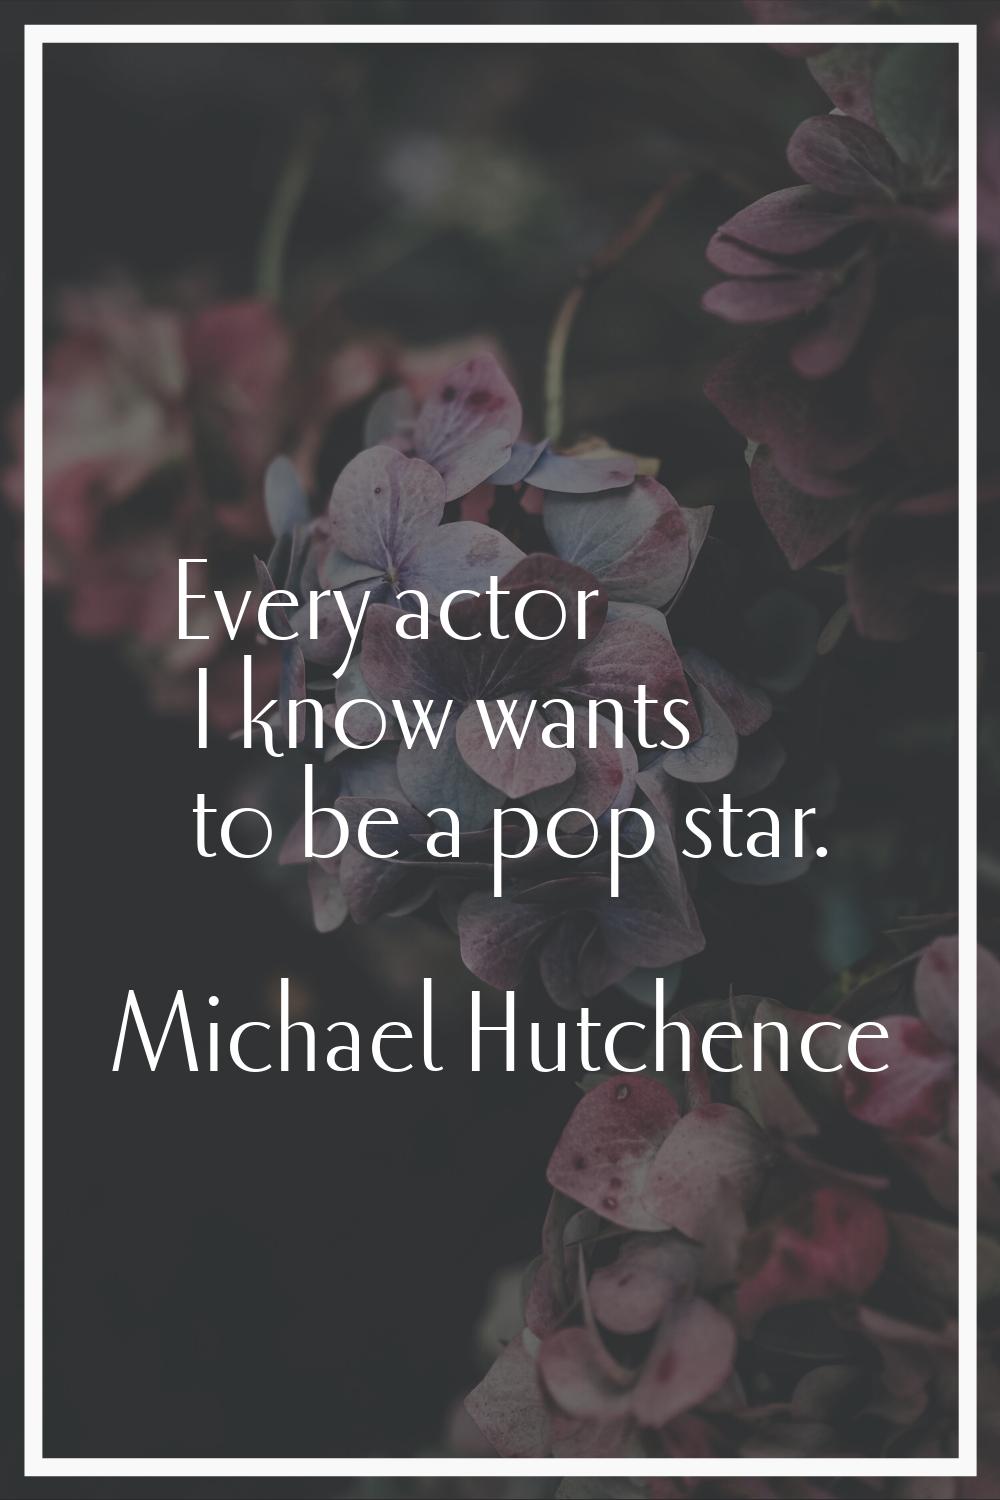 Every actor I know wants to be a pop star.